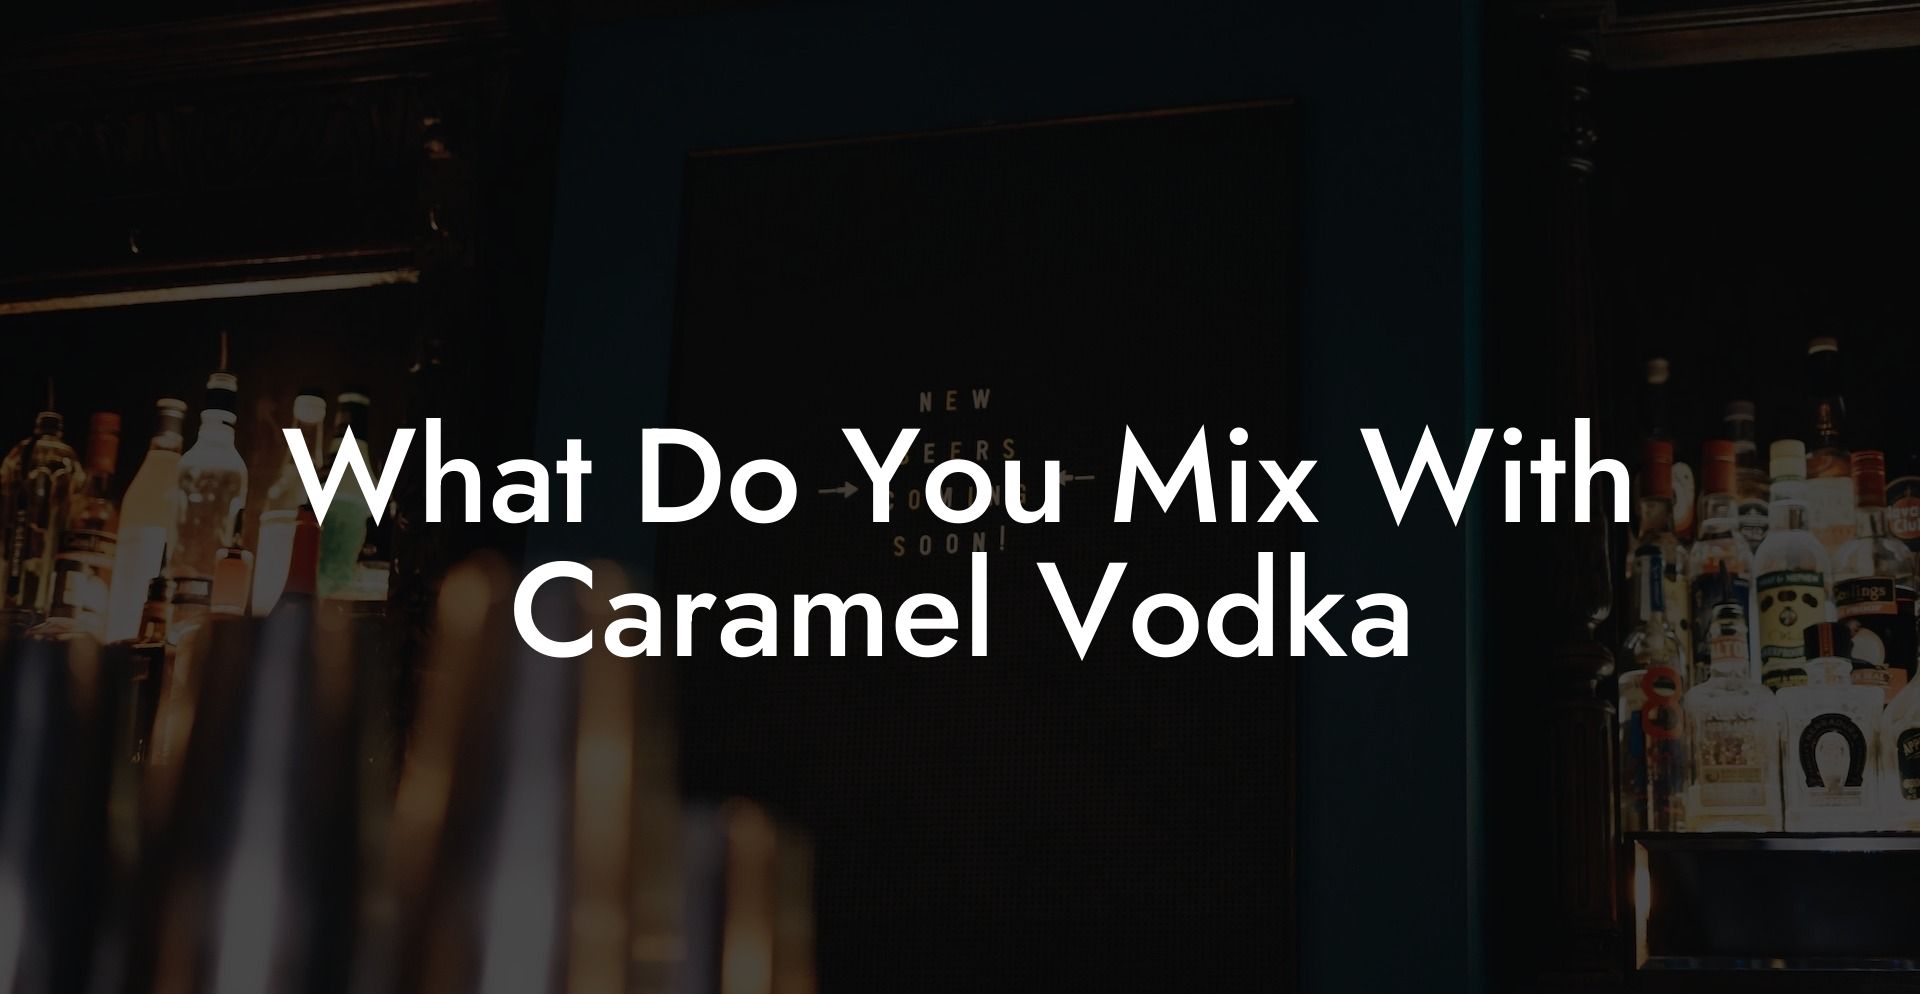 What Do You Mix With Caramel Vodka